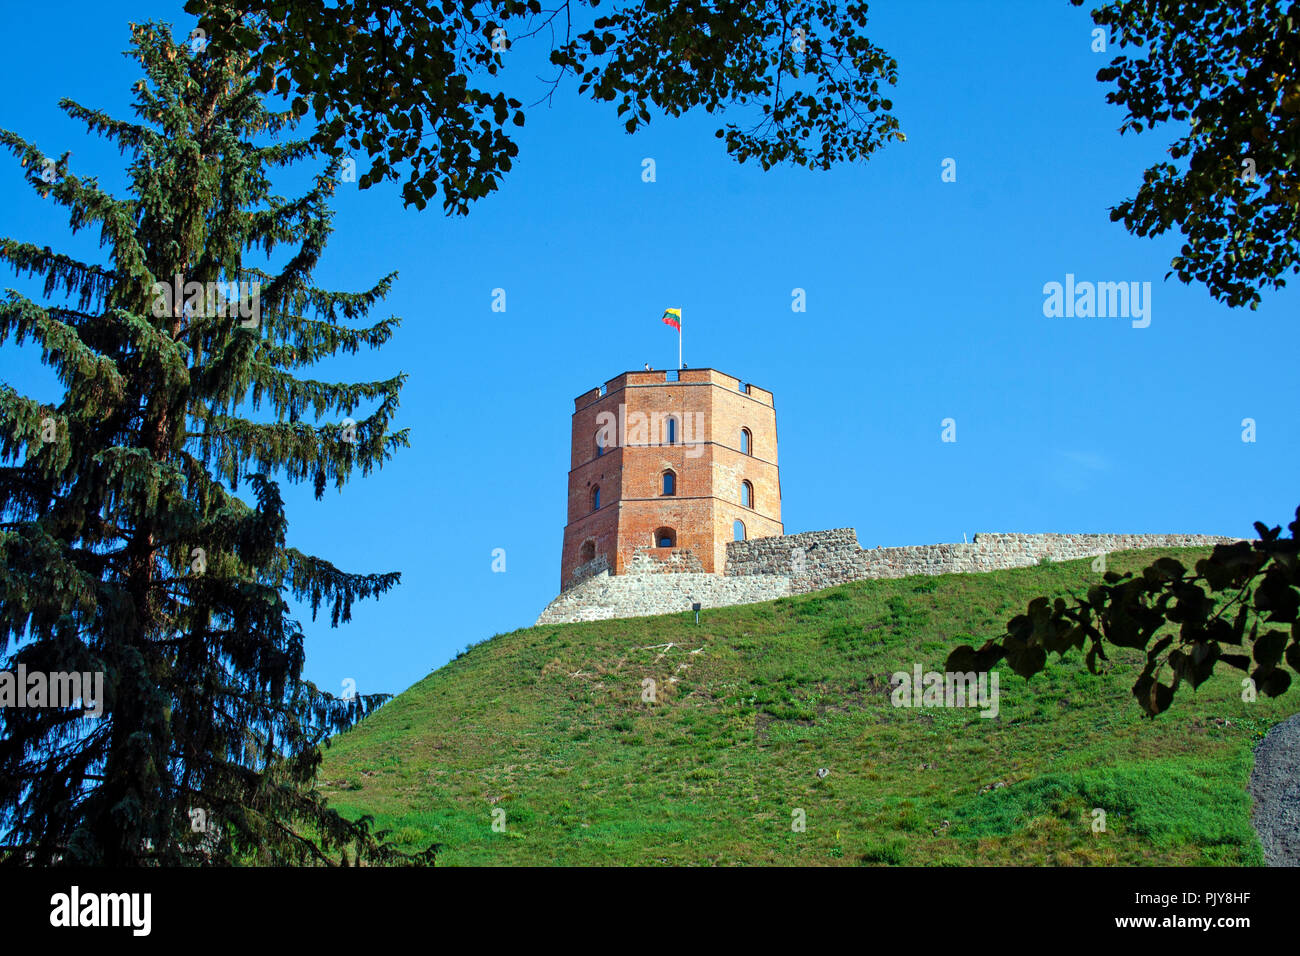 Gediminas' Tower or Castle, the remaining part of the Upper Castle in Vilnius, Lithuania with lithuanian flag waving on a green hill and blue sky Stock Photo